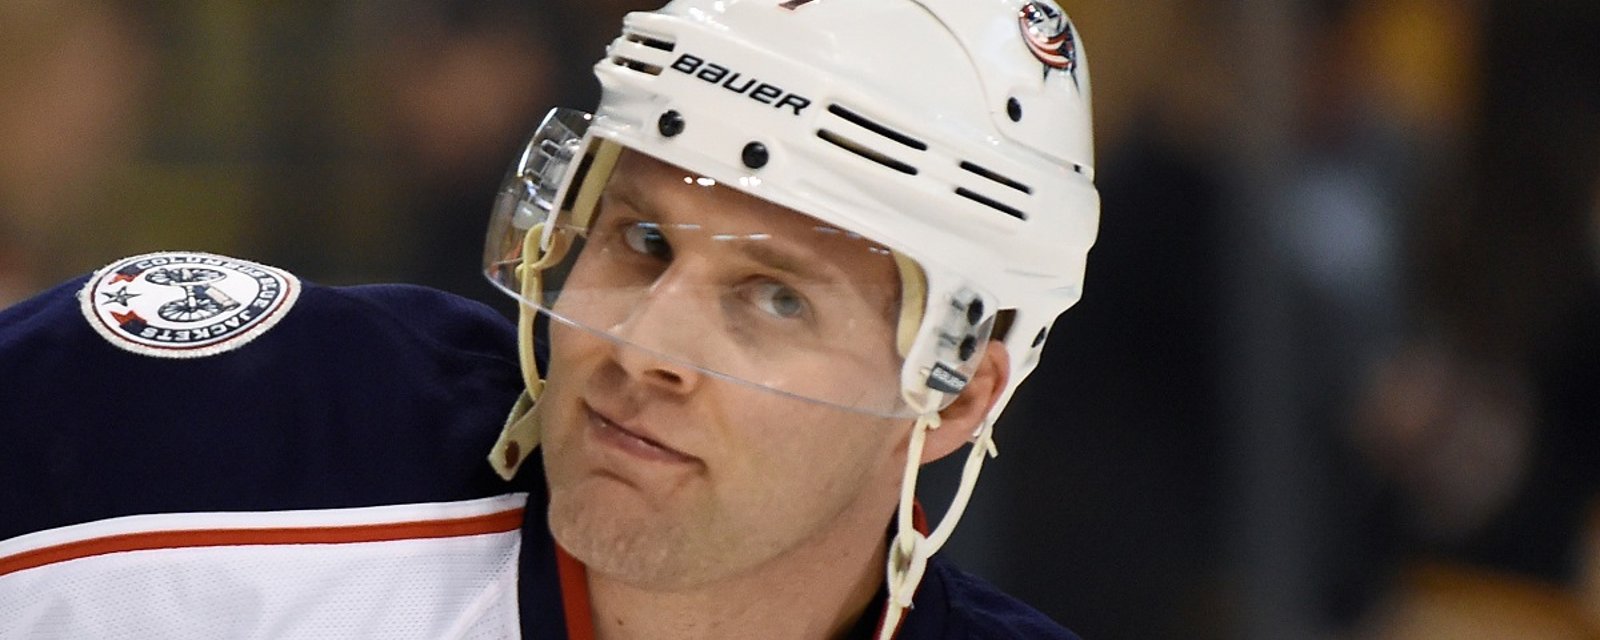 Ugly court case forces NHL player to forfeit almost all of his salary.